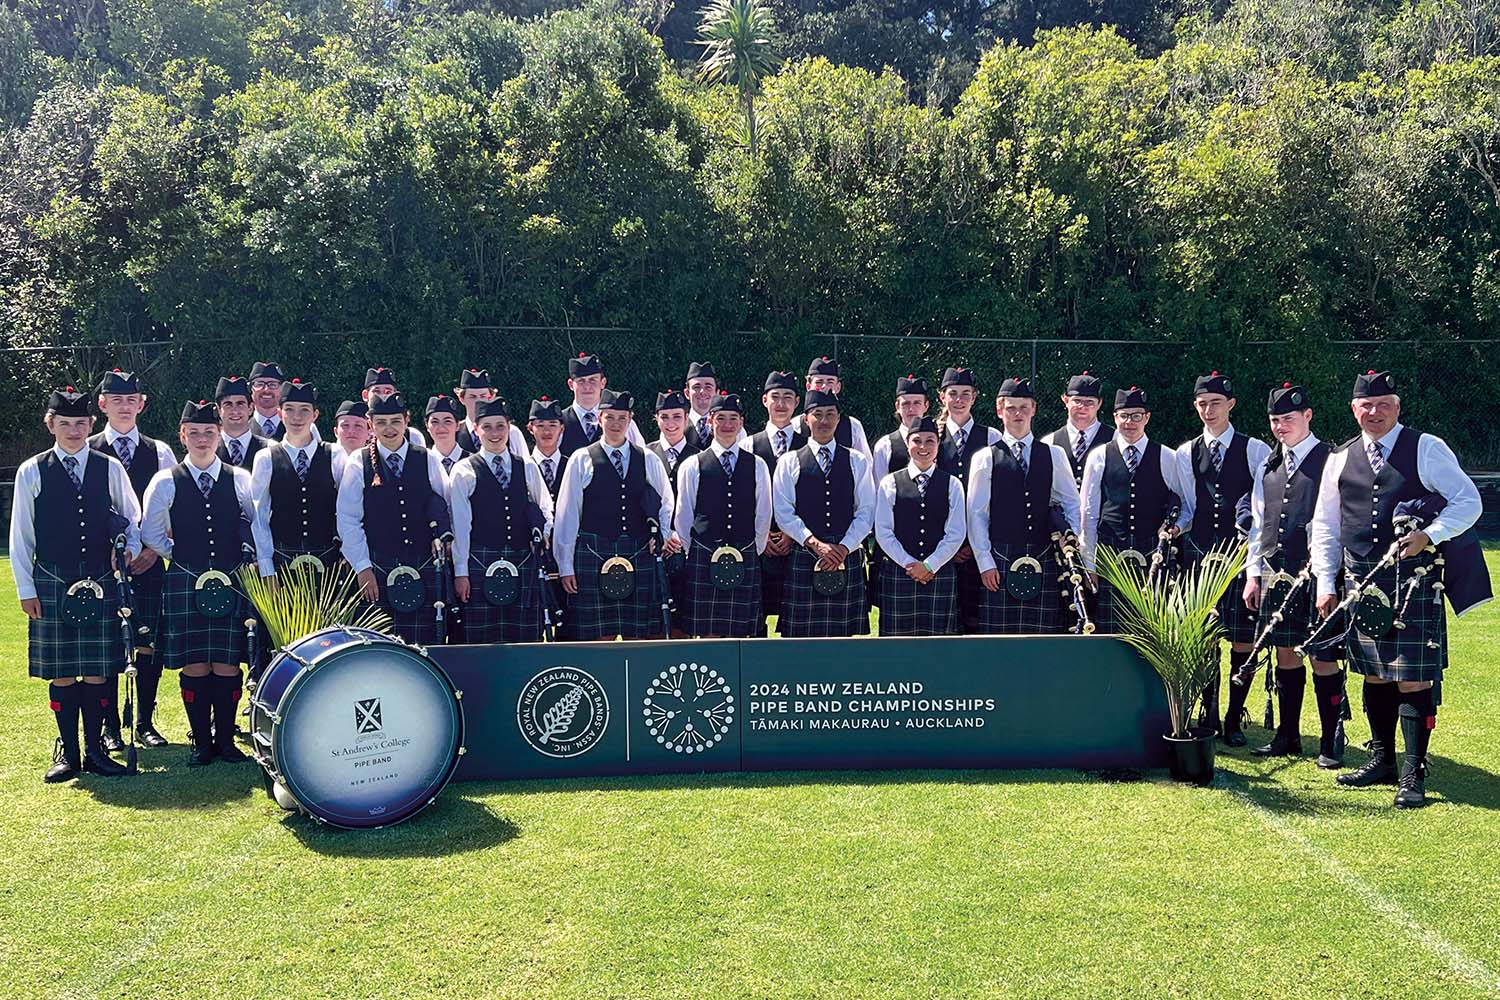 St Andrew's College Pipe Band members and staff at the 2024 New Zealand Pipe Band Championships.